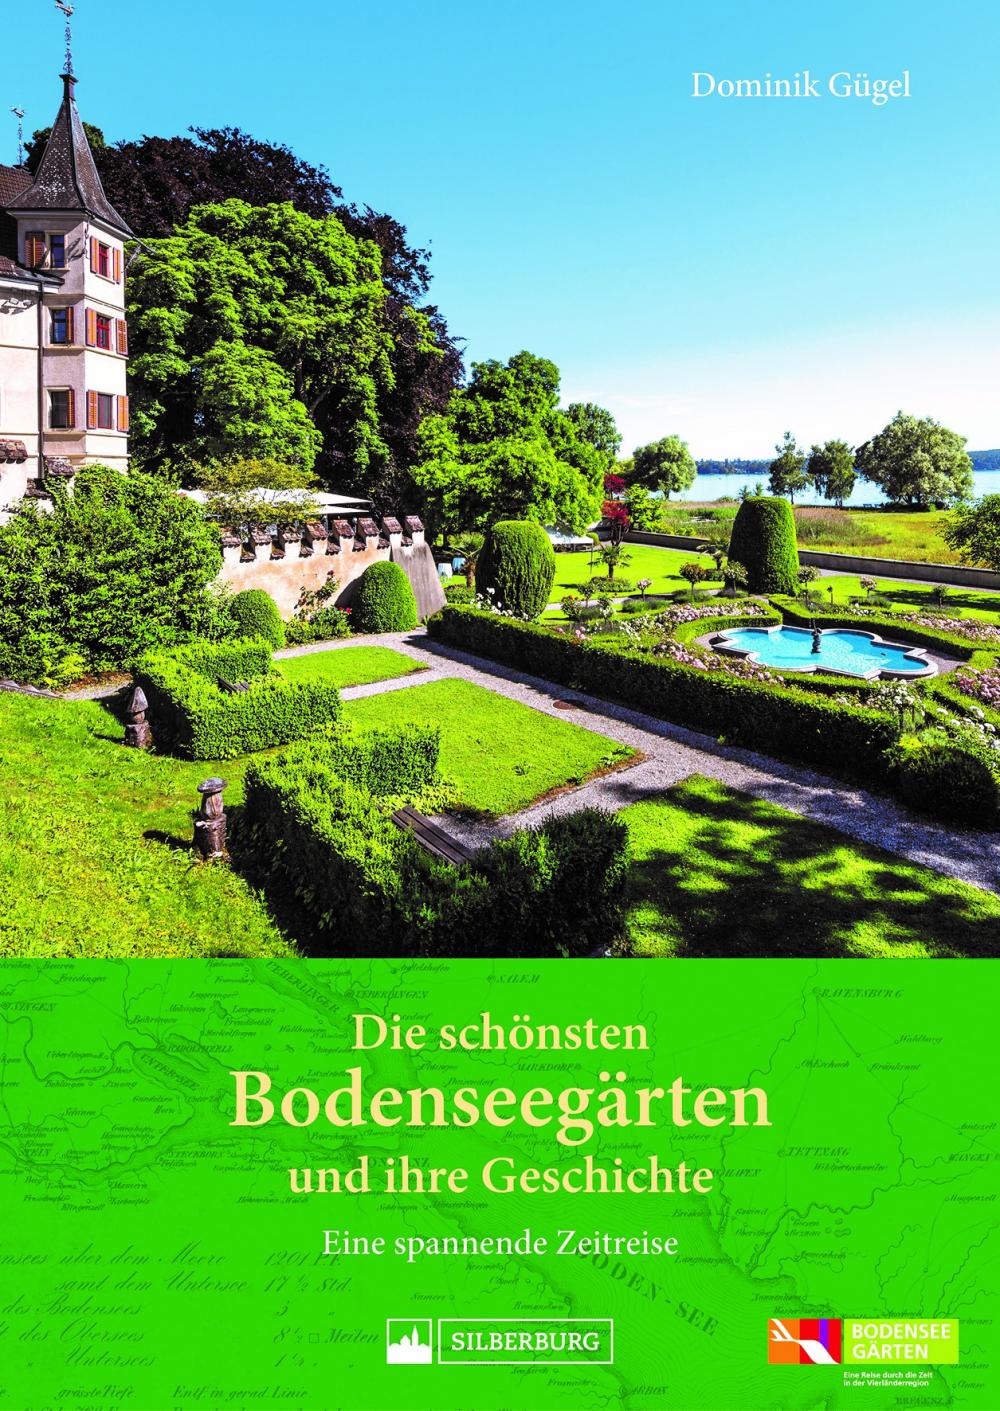 Book only in German